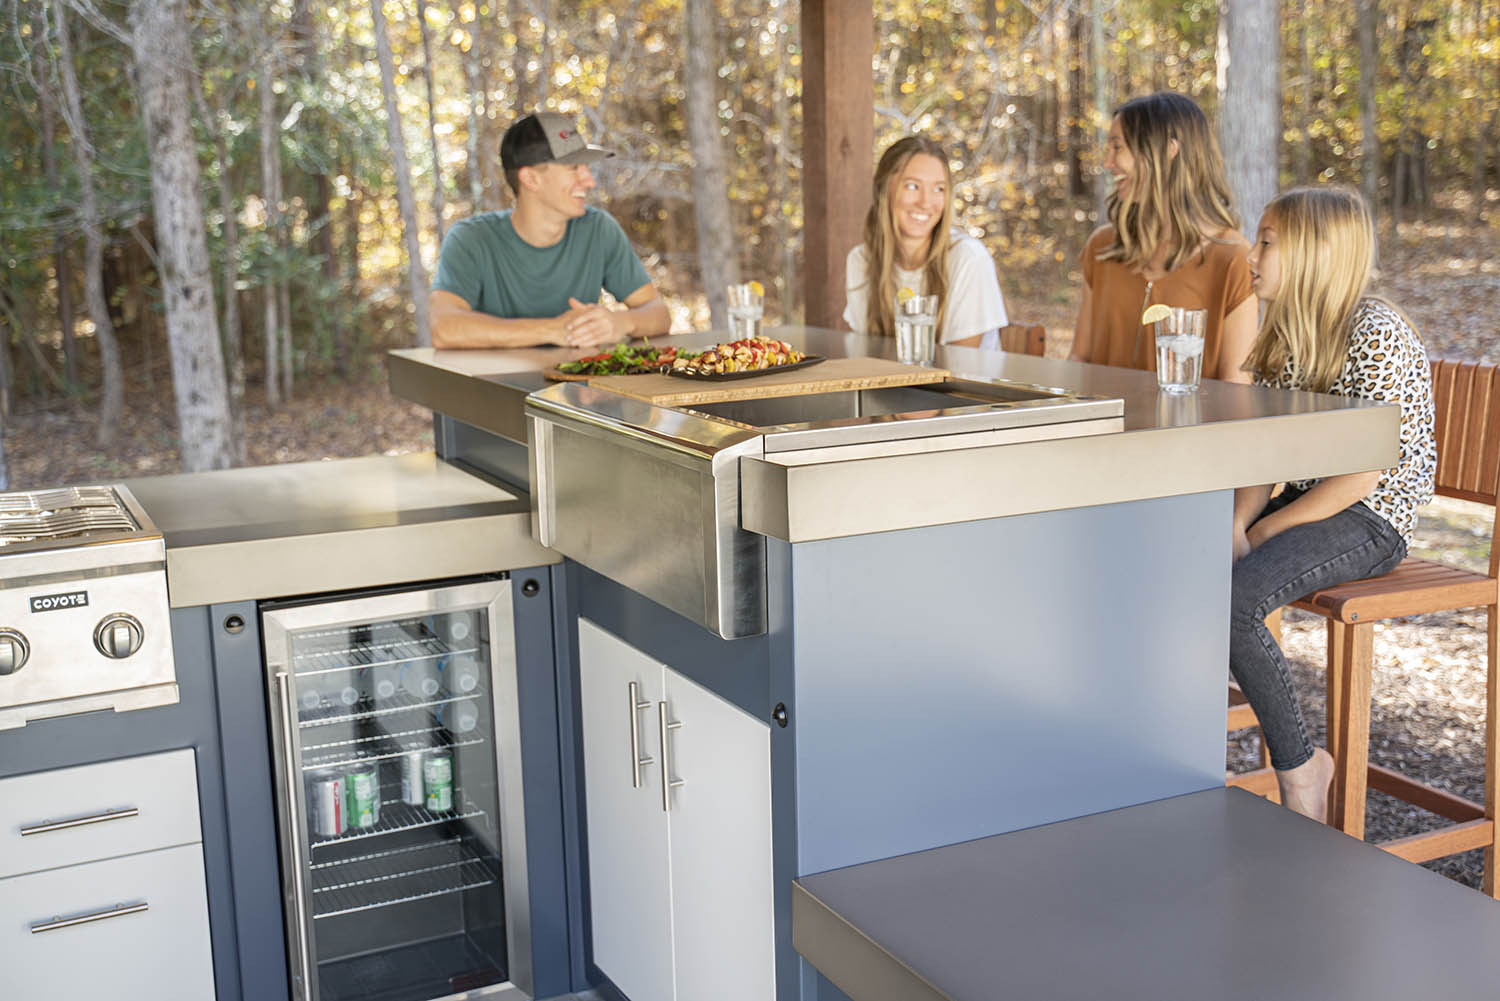 Smoker Module for Outdoor Kitchens